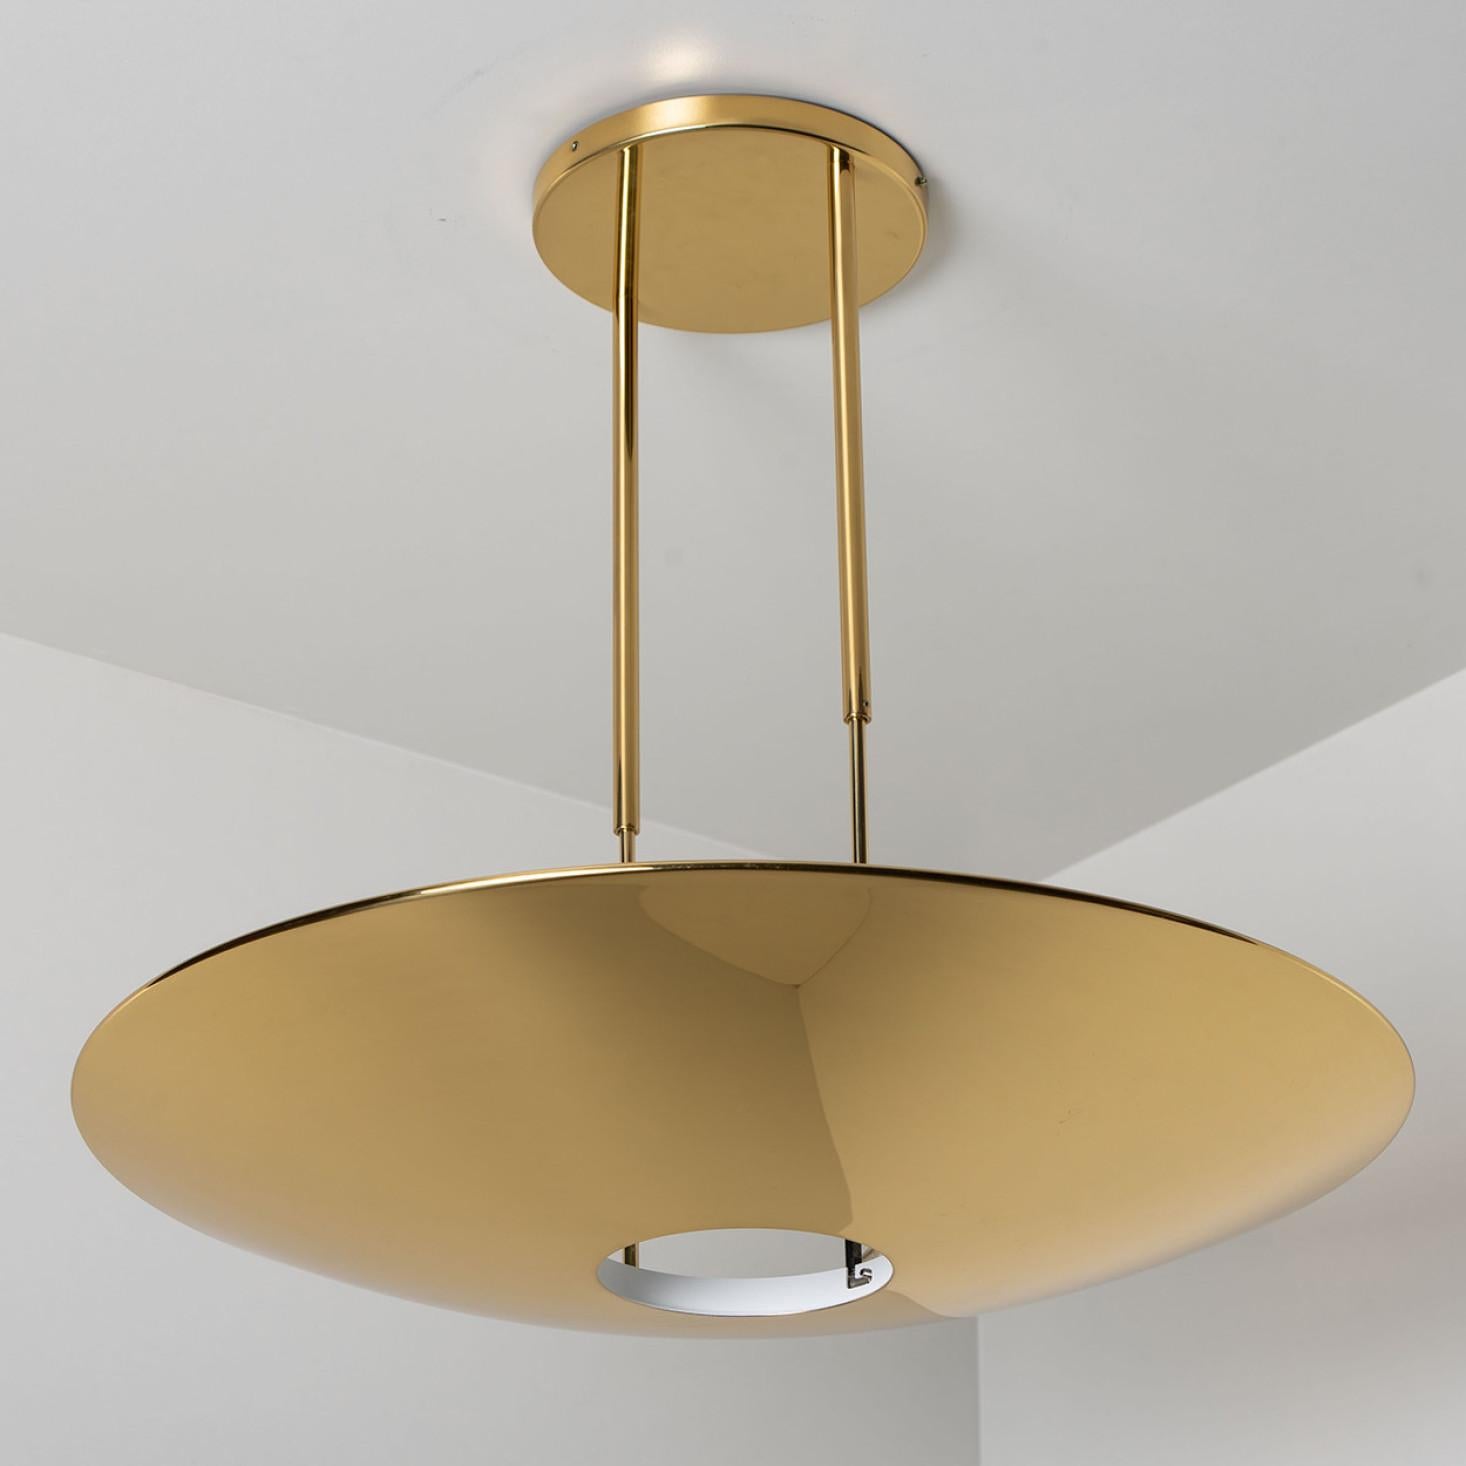 High quality brass pendant lamp or ceiling fixture 'Sola 80' by Florian Schulz. The light has an opening at the bottom for a round diffuser out of glass. It is 90 cm in diameter and radiates a direct and an indirect lighting.
The light is adjustable